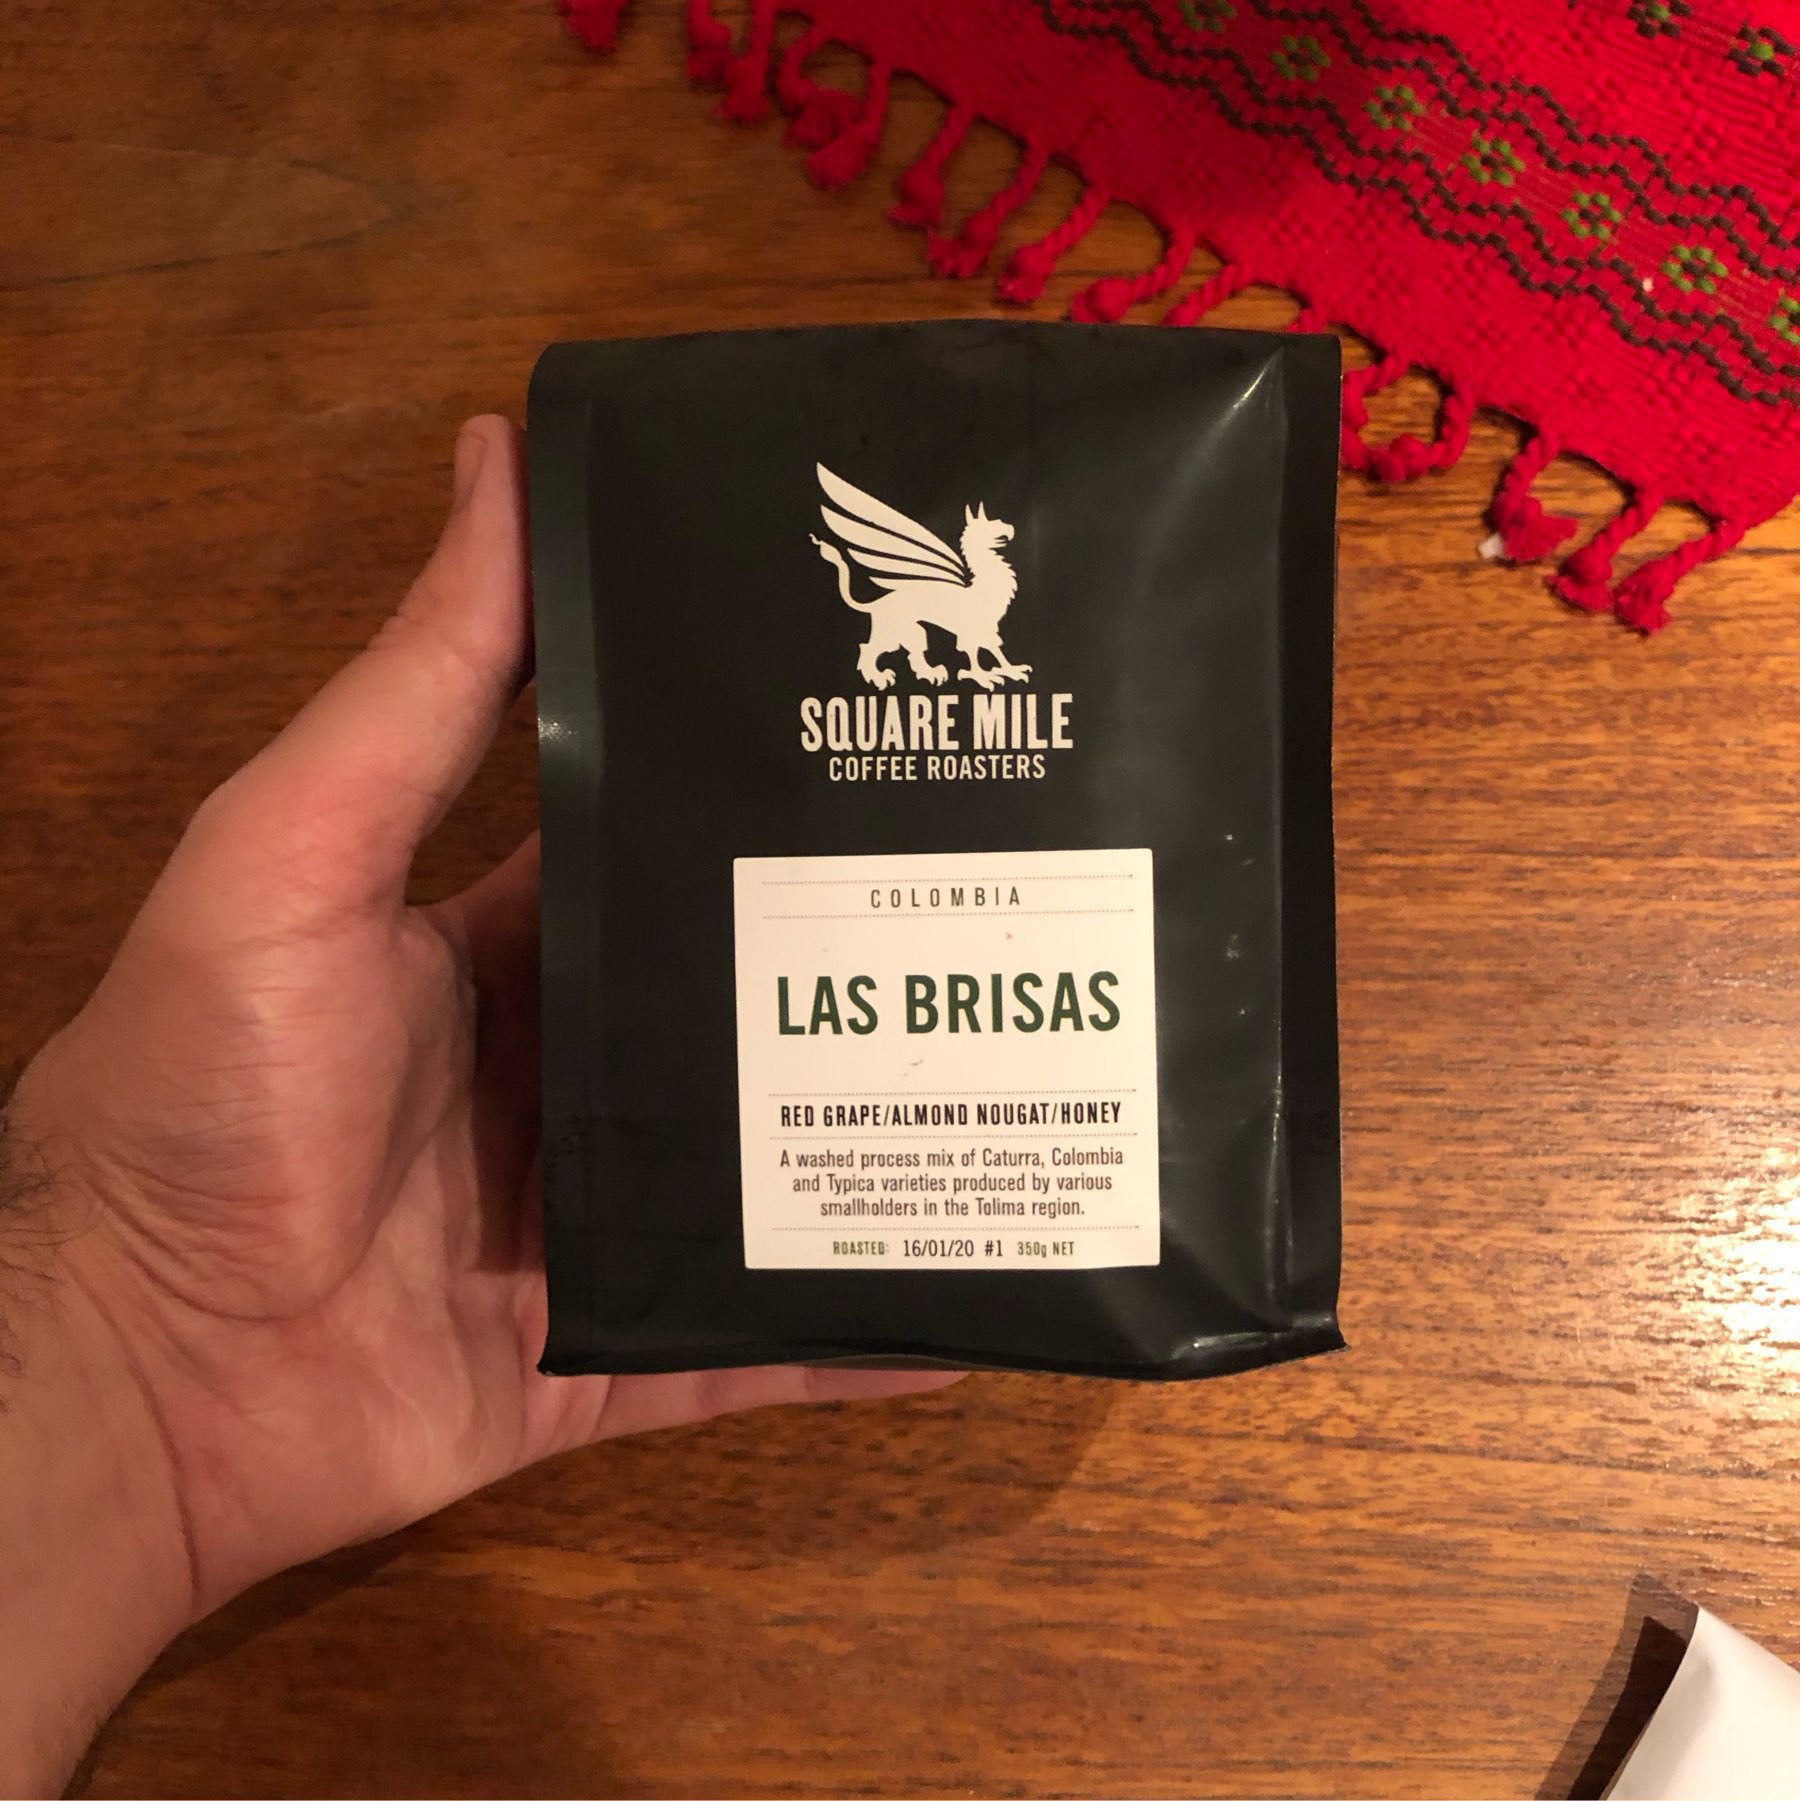 Bag of beans from Square Mile called Las Brisas